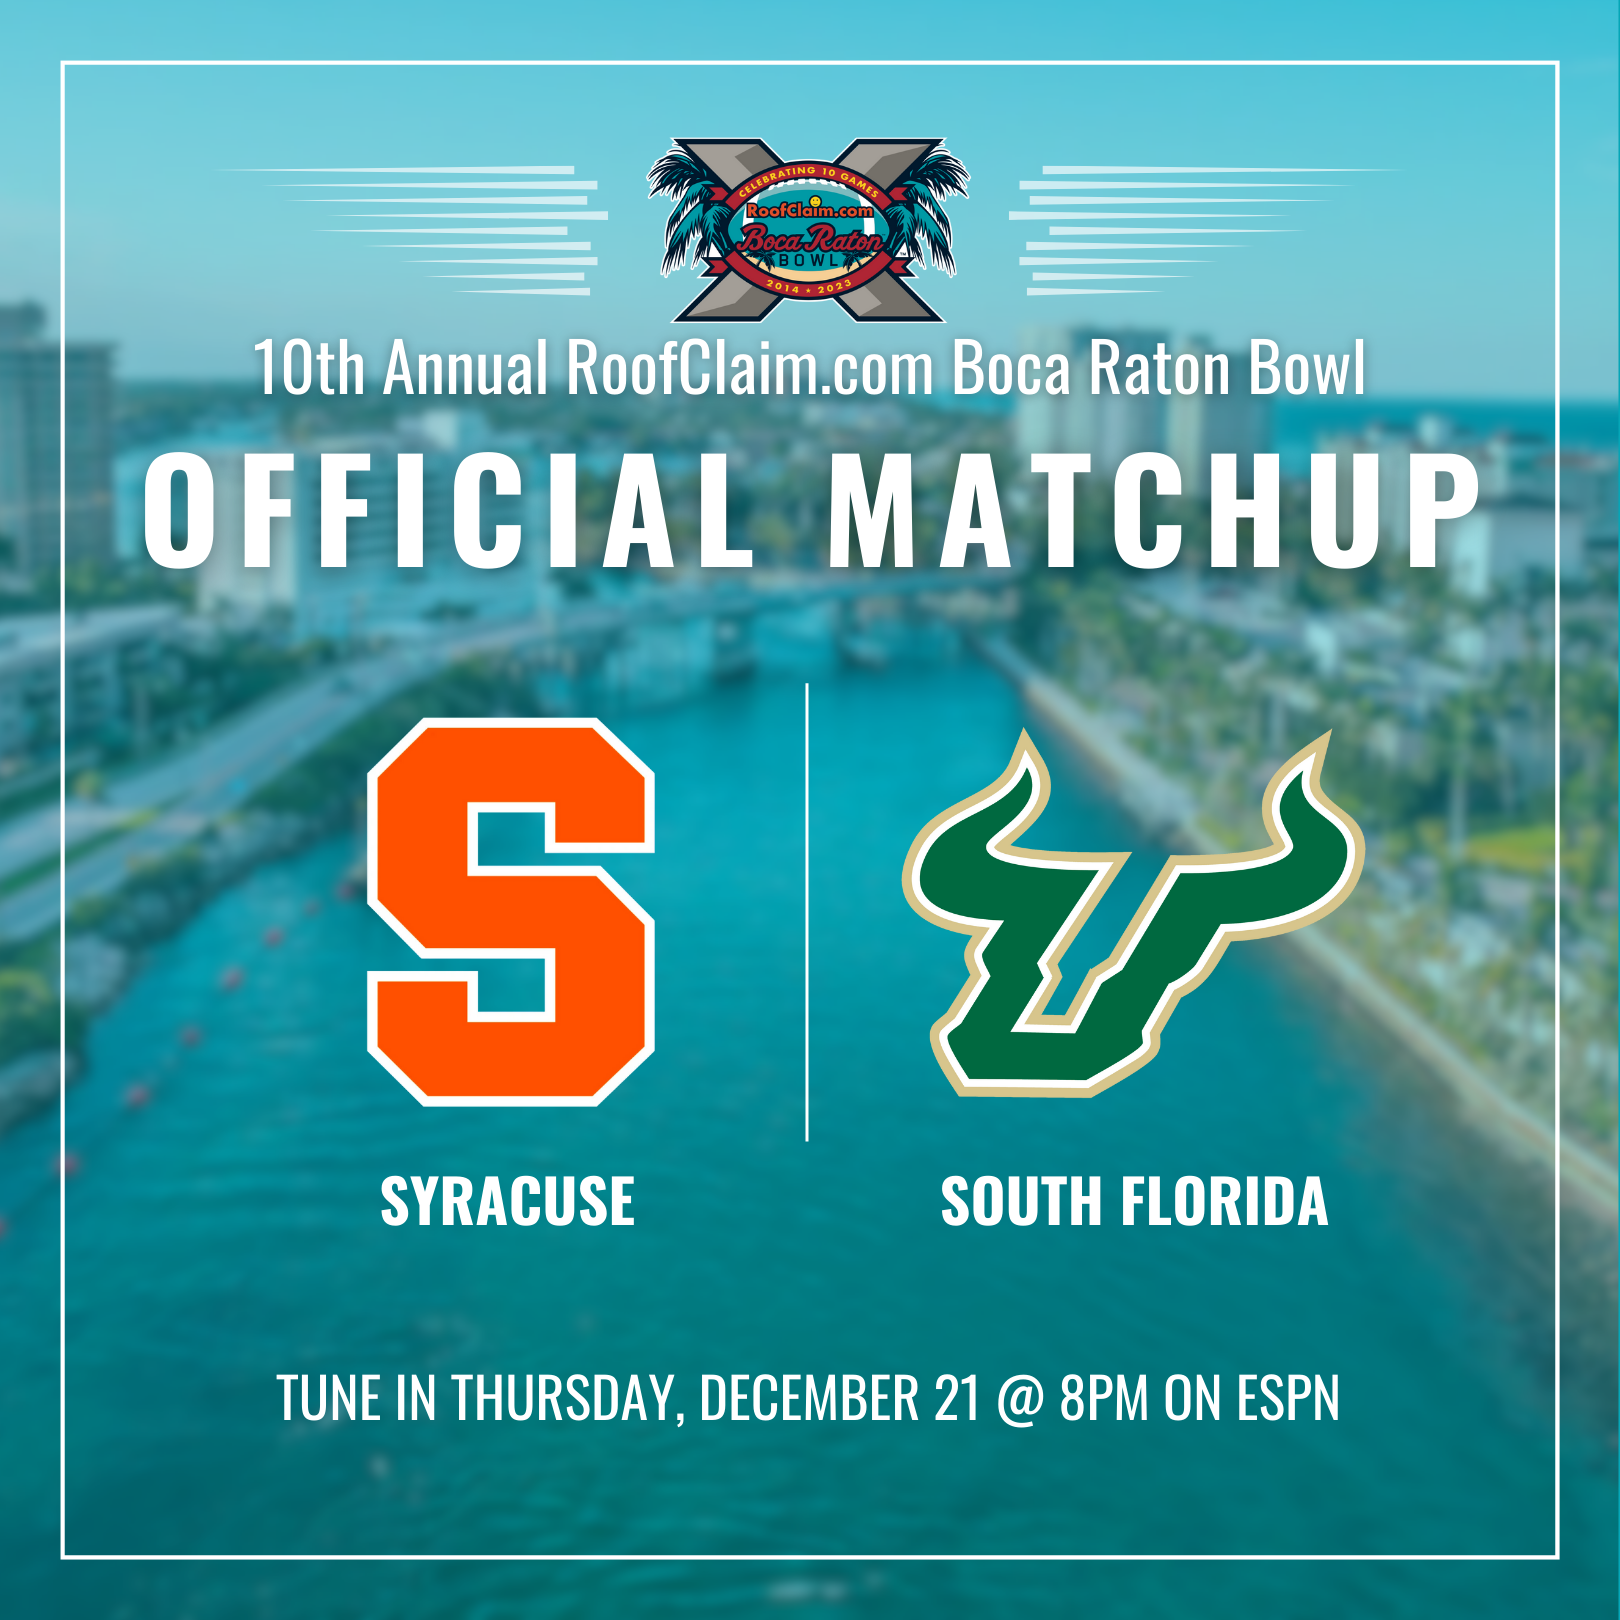 History and Pageantry of the Boca Raton Bowl South Florida Media